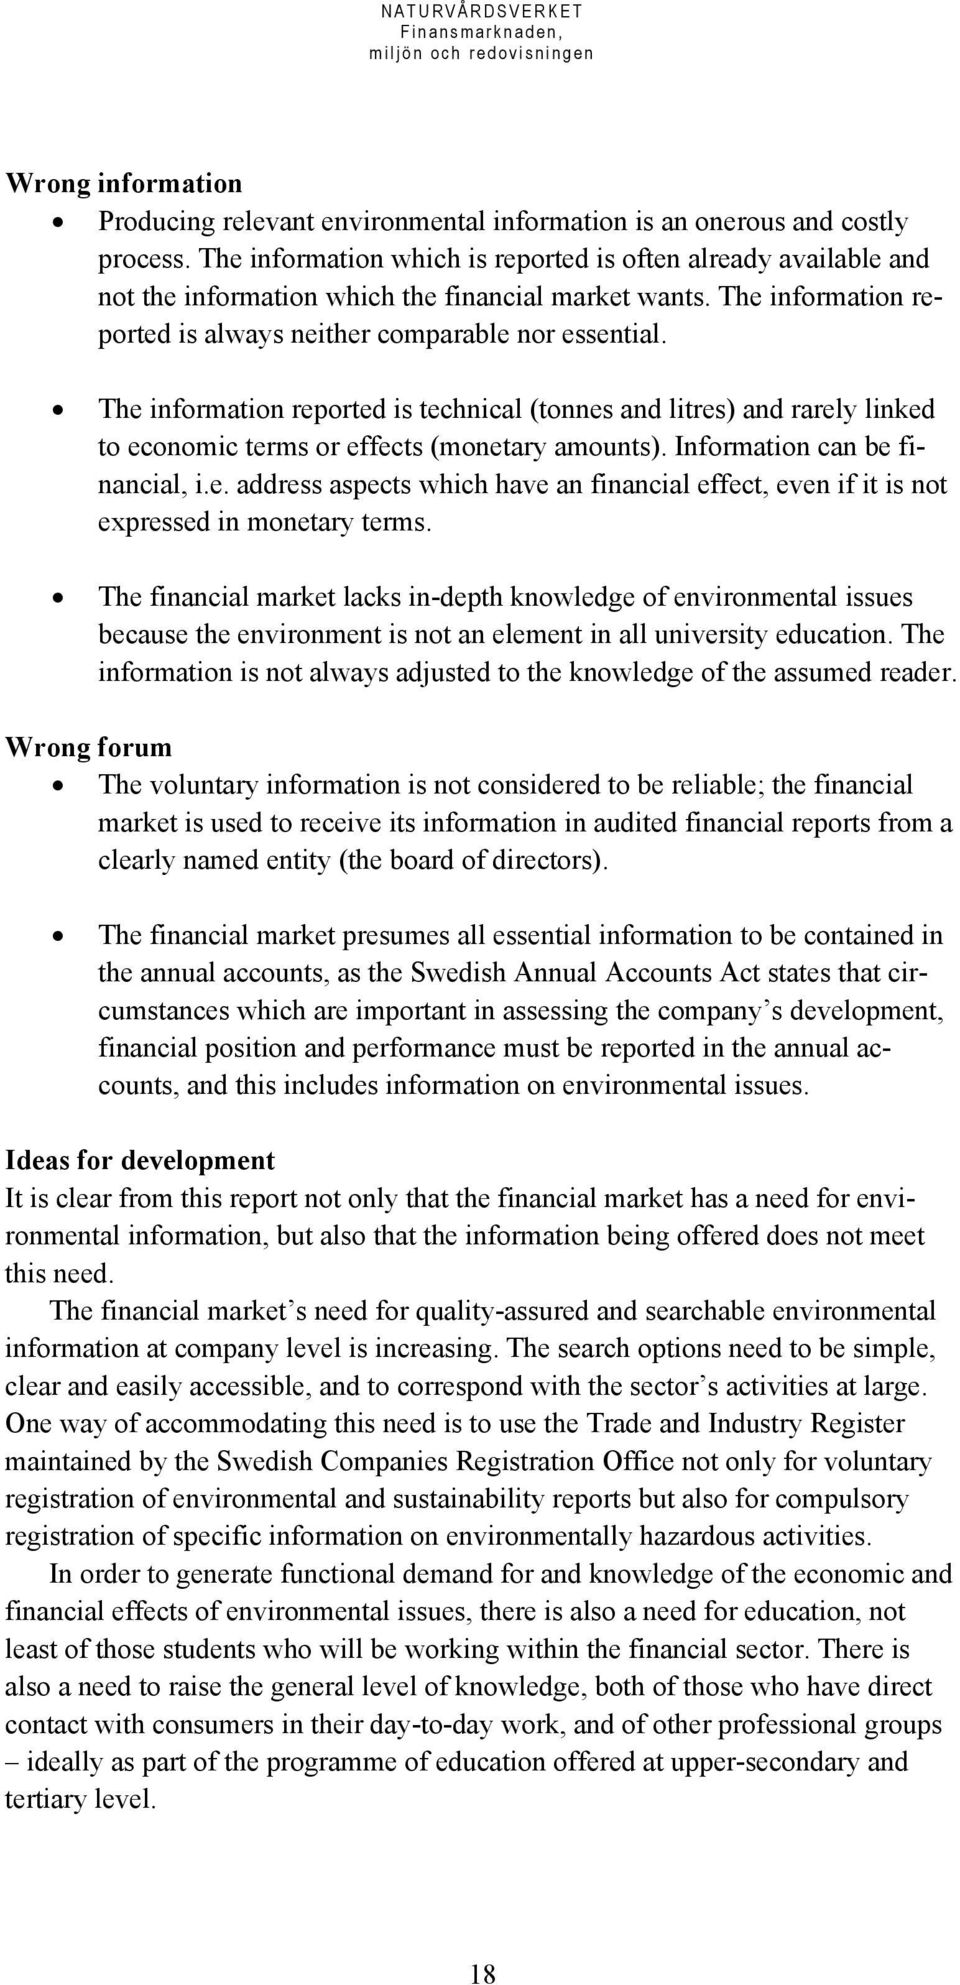 The information reported is technical (tonnes and litres) and rarely linked to economic terms or effects (monetary amounts). Information can be financial, i.e. address aspects which have an financial effect, even if it is not expressed in monetary terms.